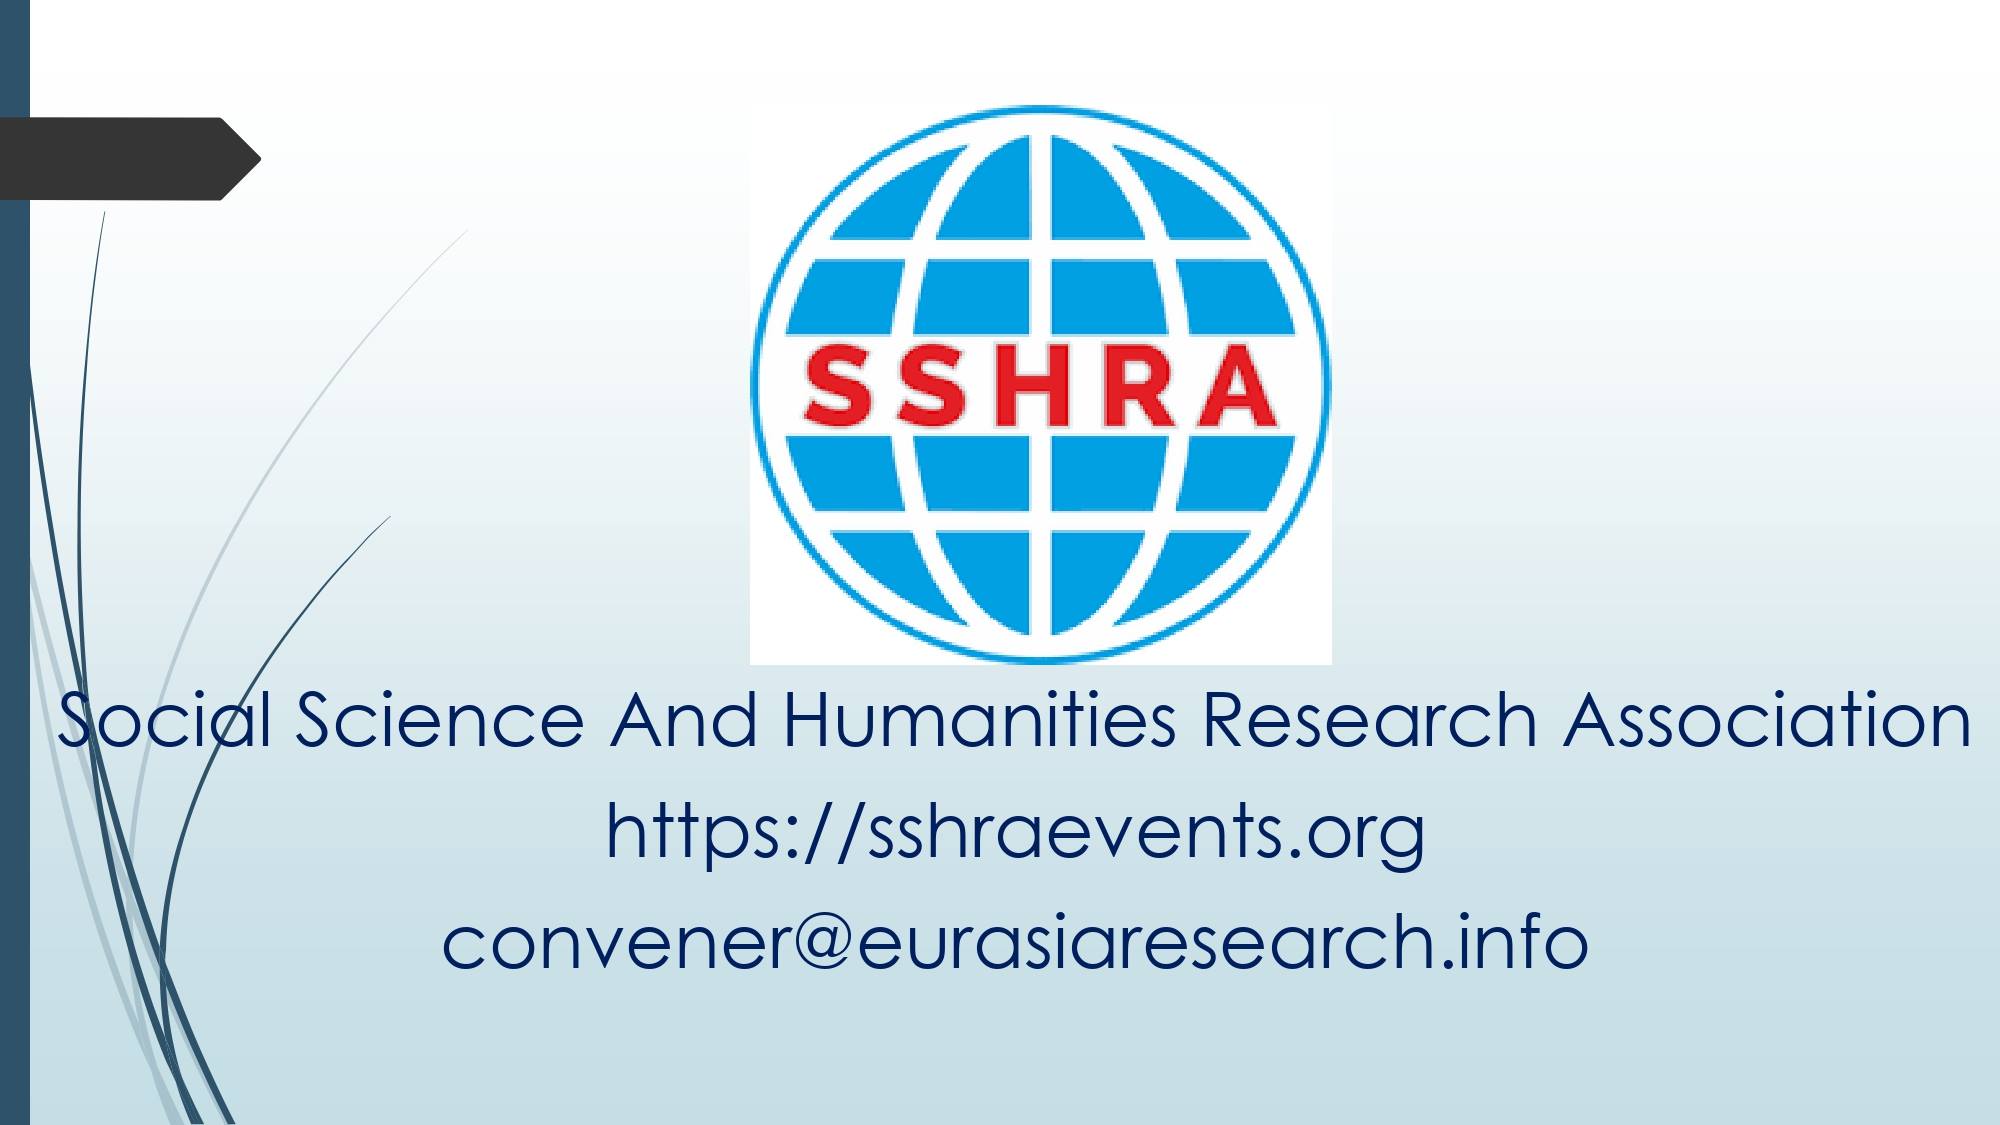 Rome – International Conference on Social Science & Humanities (ICSSH), 13-14 April 2021, Rome, Italy